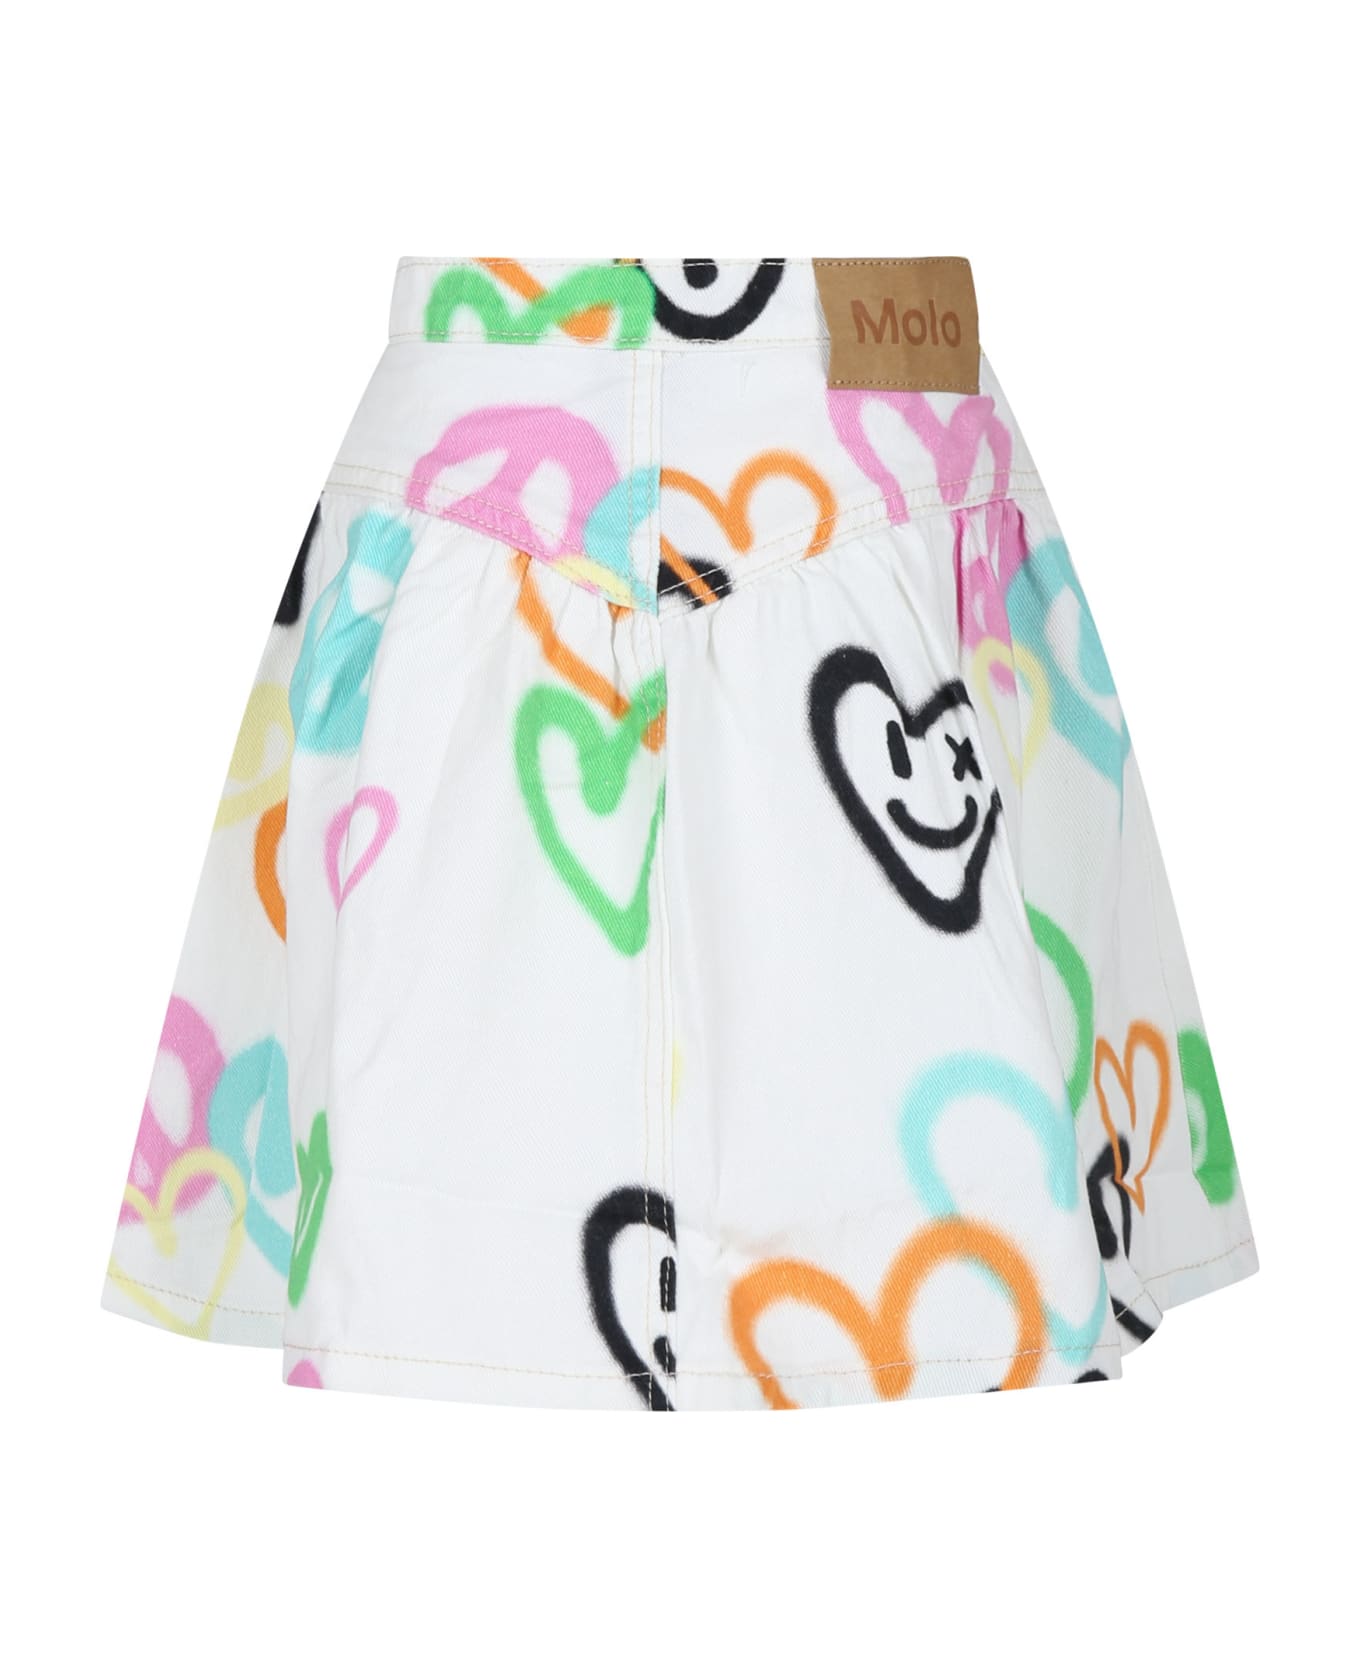 Molo White Skirt For Girl With Hearts Print - White